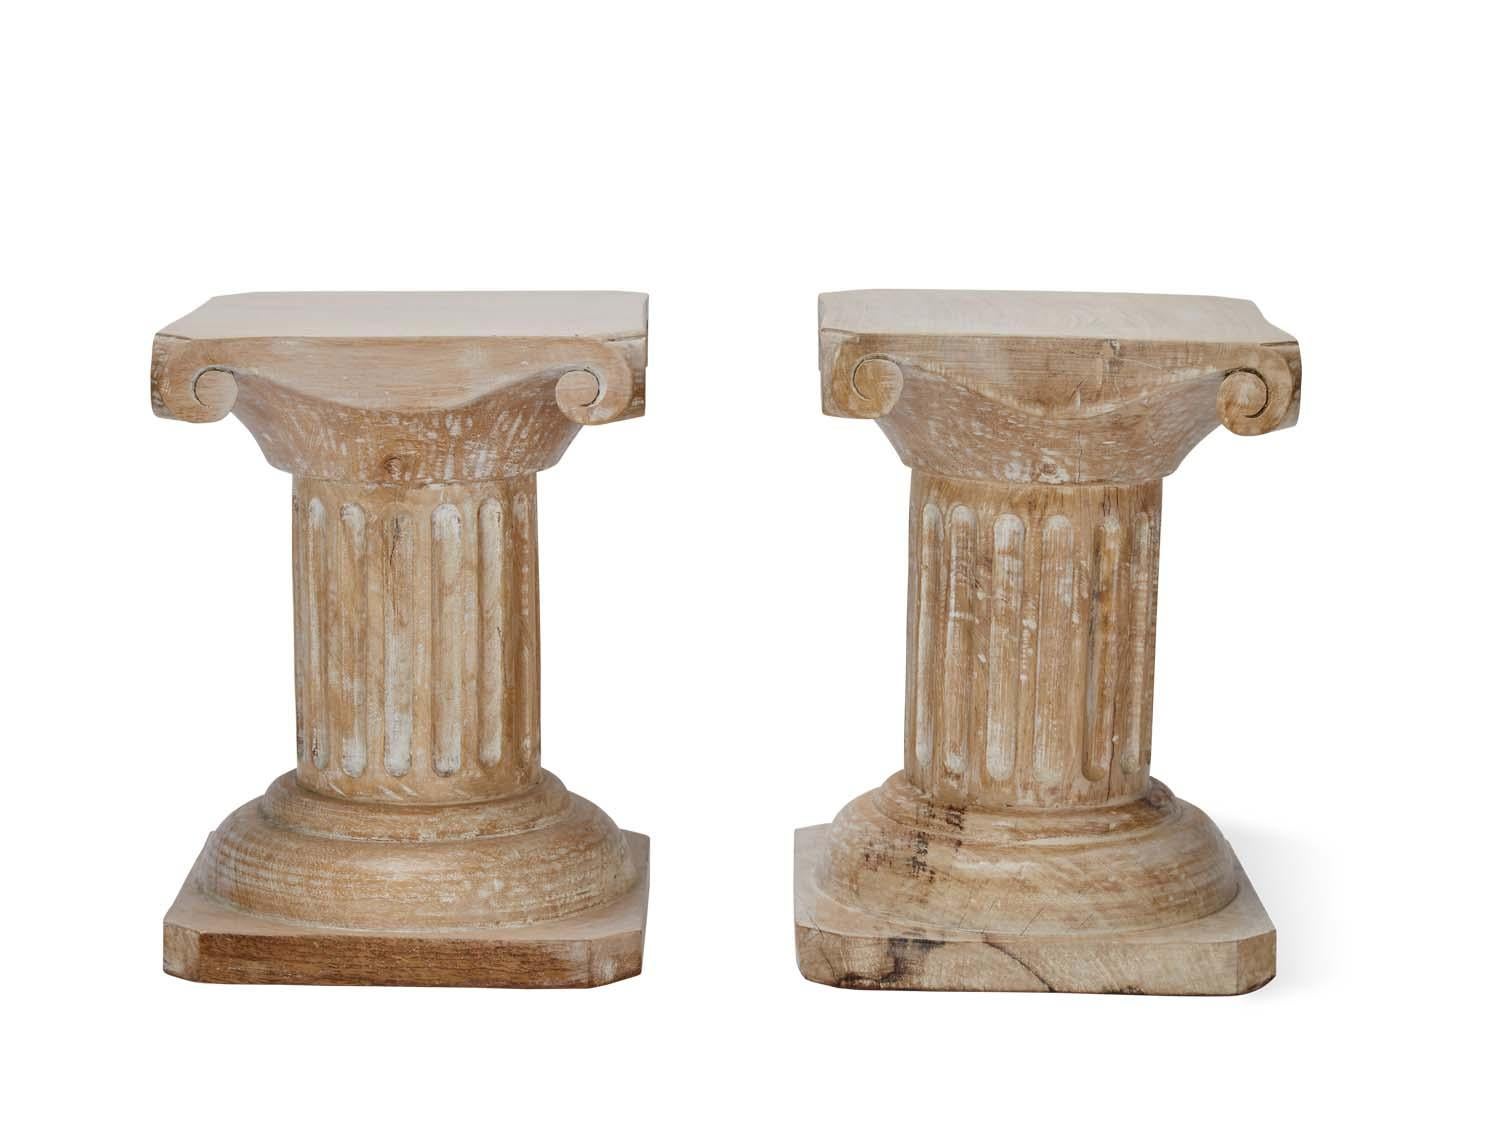 Pair of Ionic column pedestal side tables
Dimensions: 12